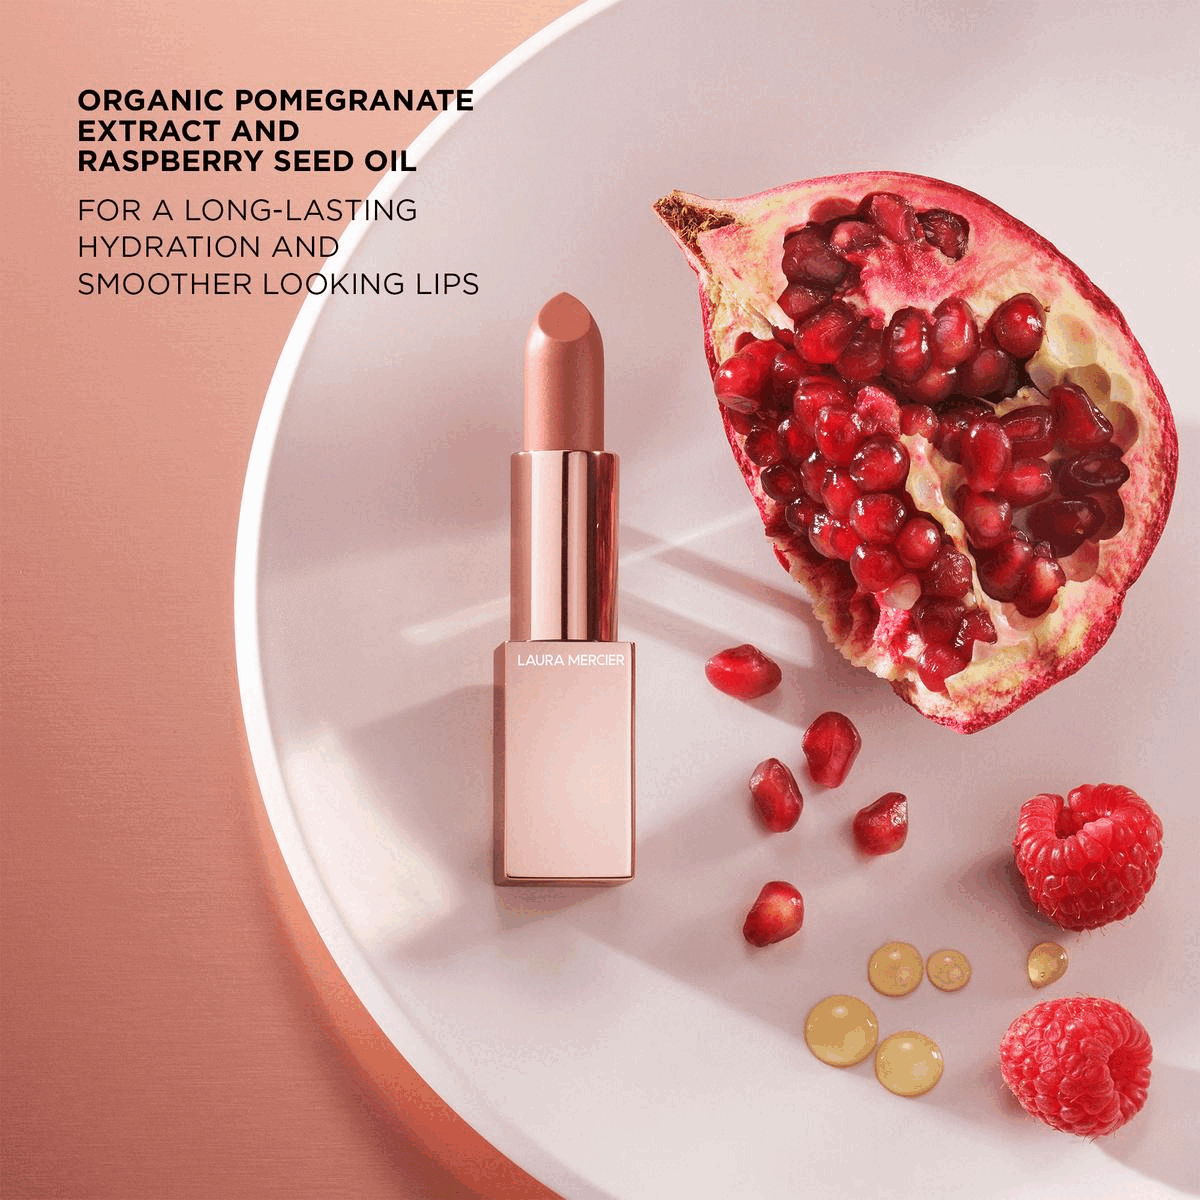 Image 1, pomegranate extract and rose seed oil. Image 2, rose glow pearl blend